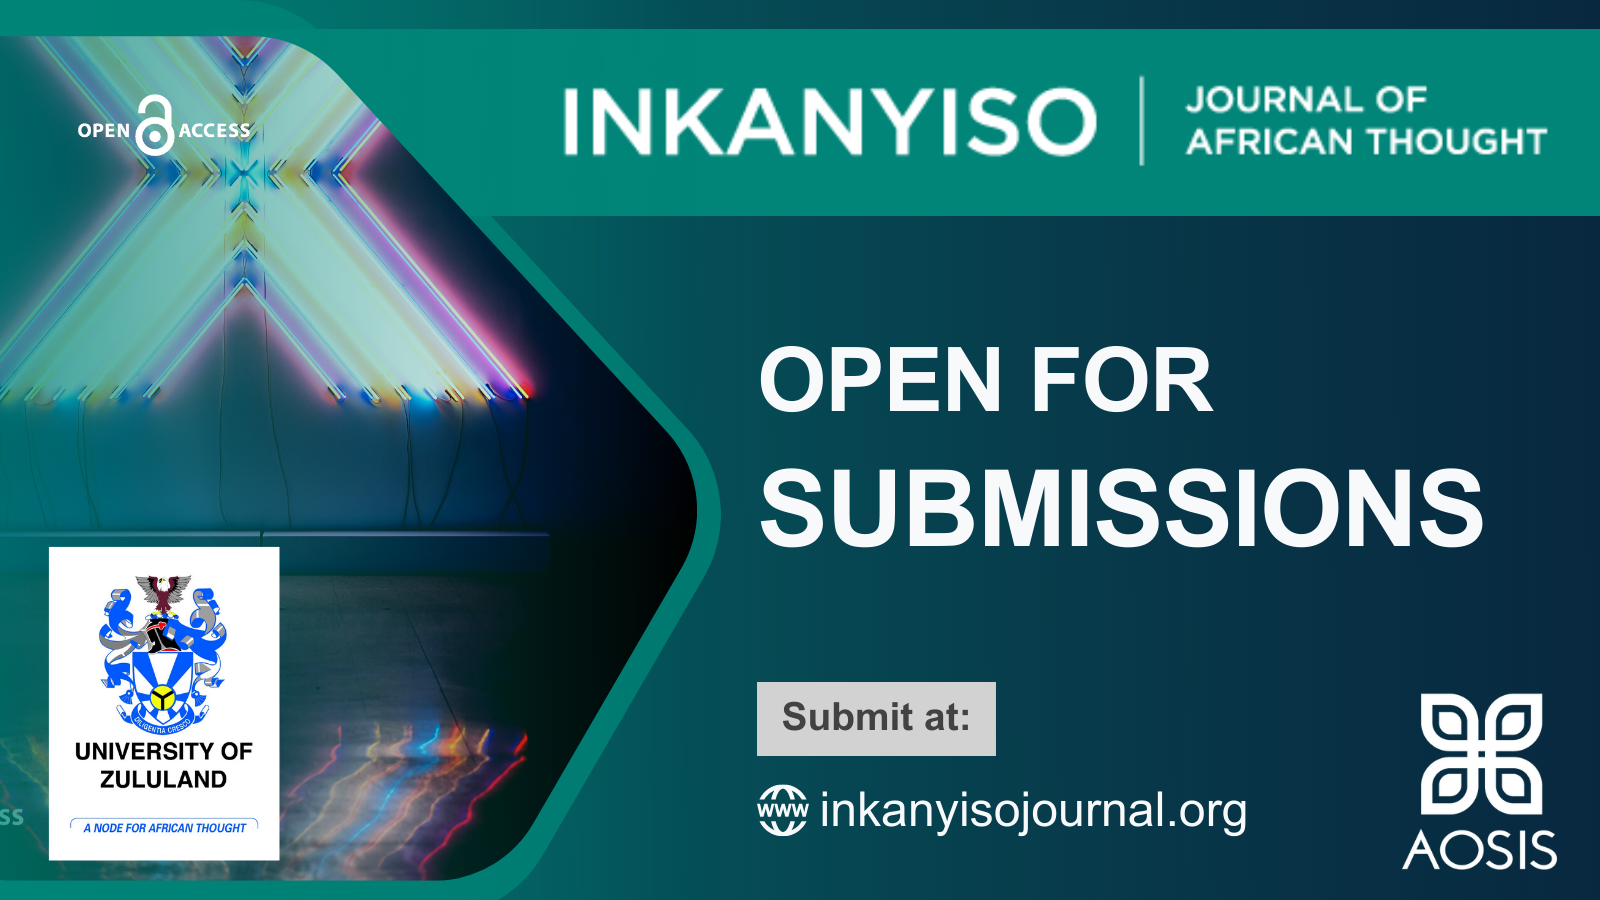 Inkanyiso - Journal of African Thought